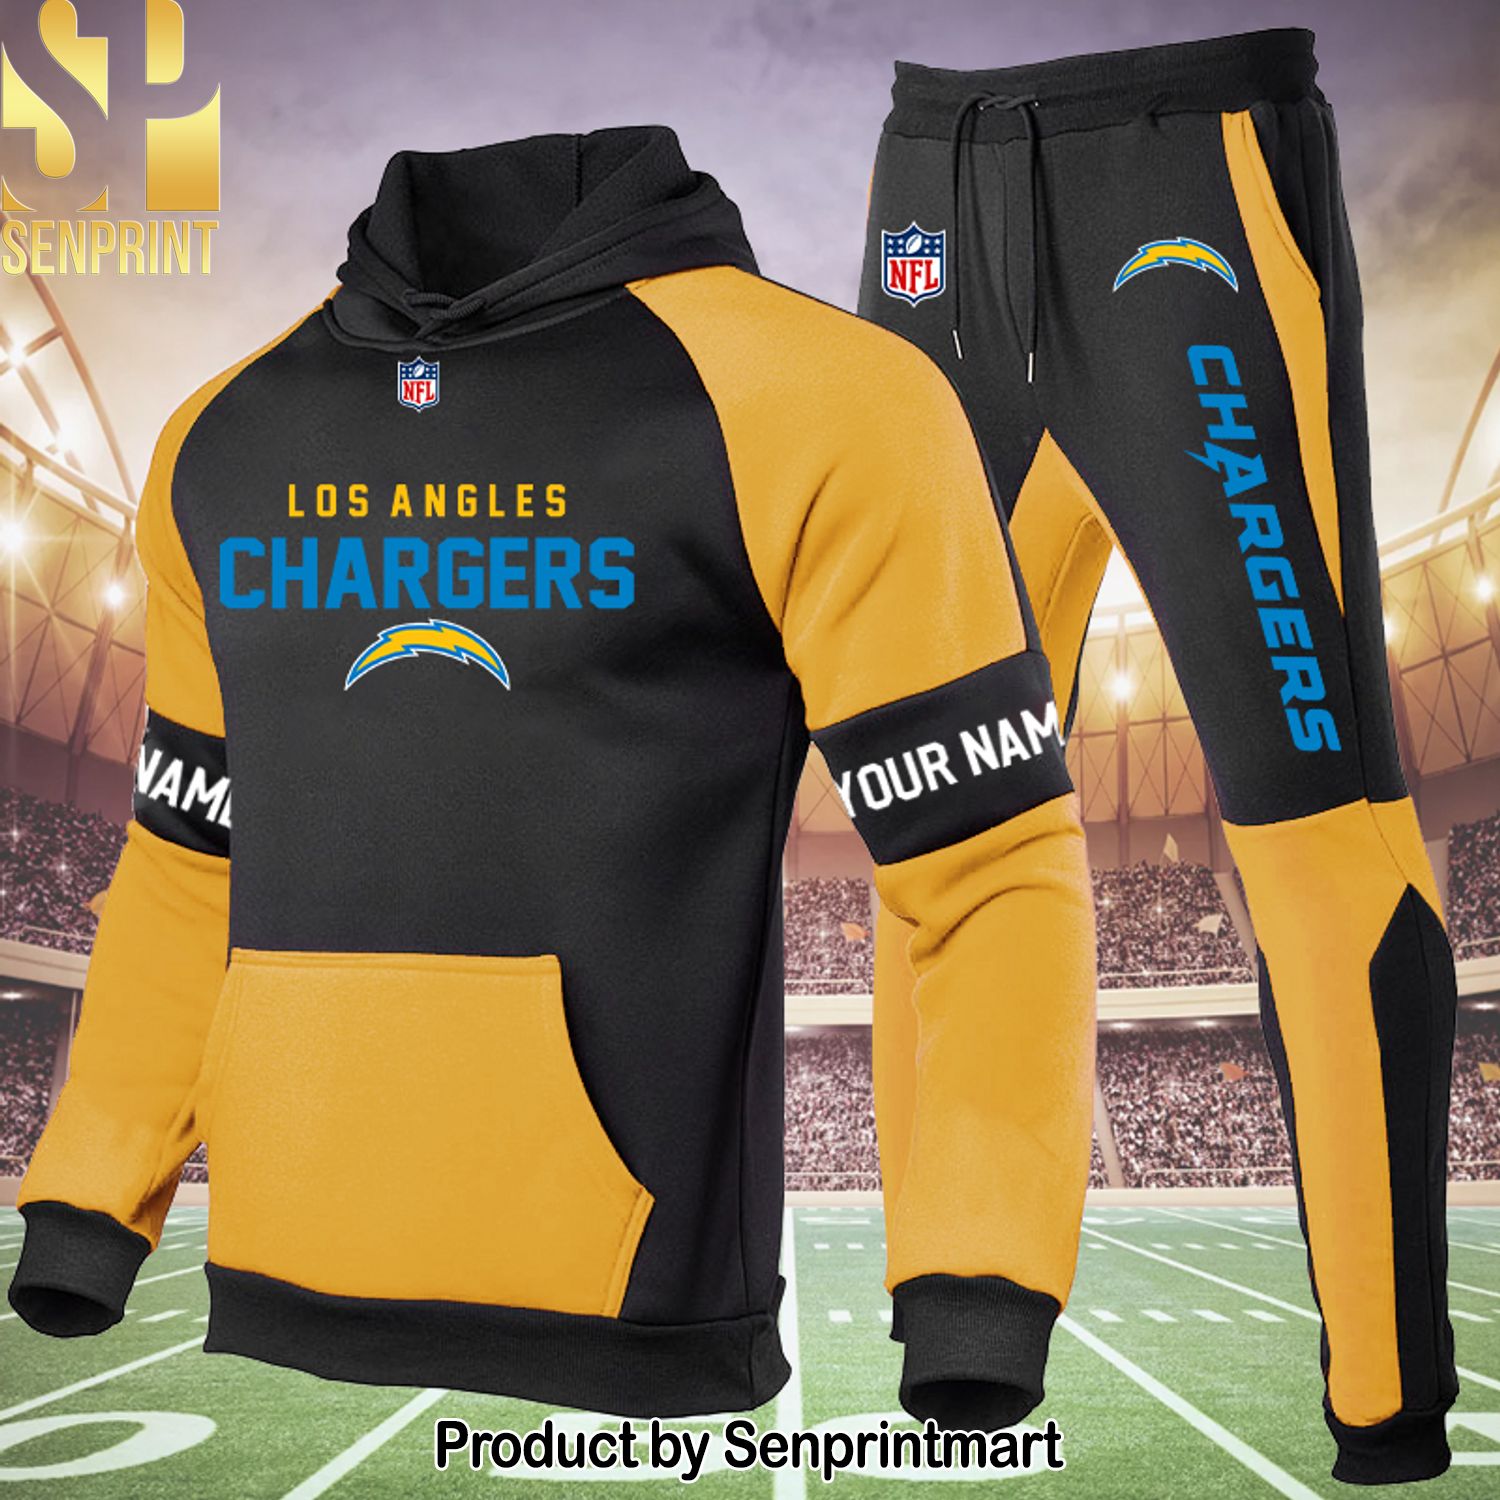 Los Angeles Chargers All Over Print Classic Shirt and Pants